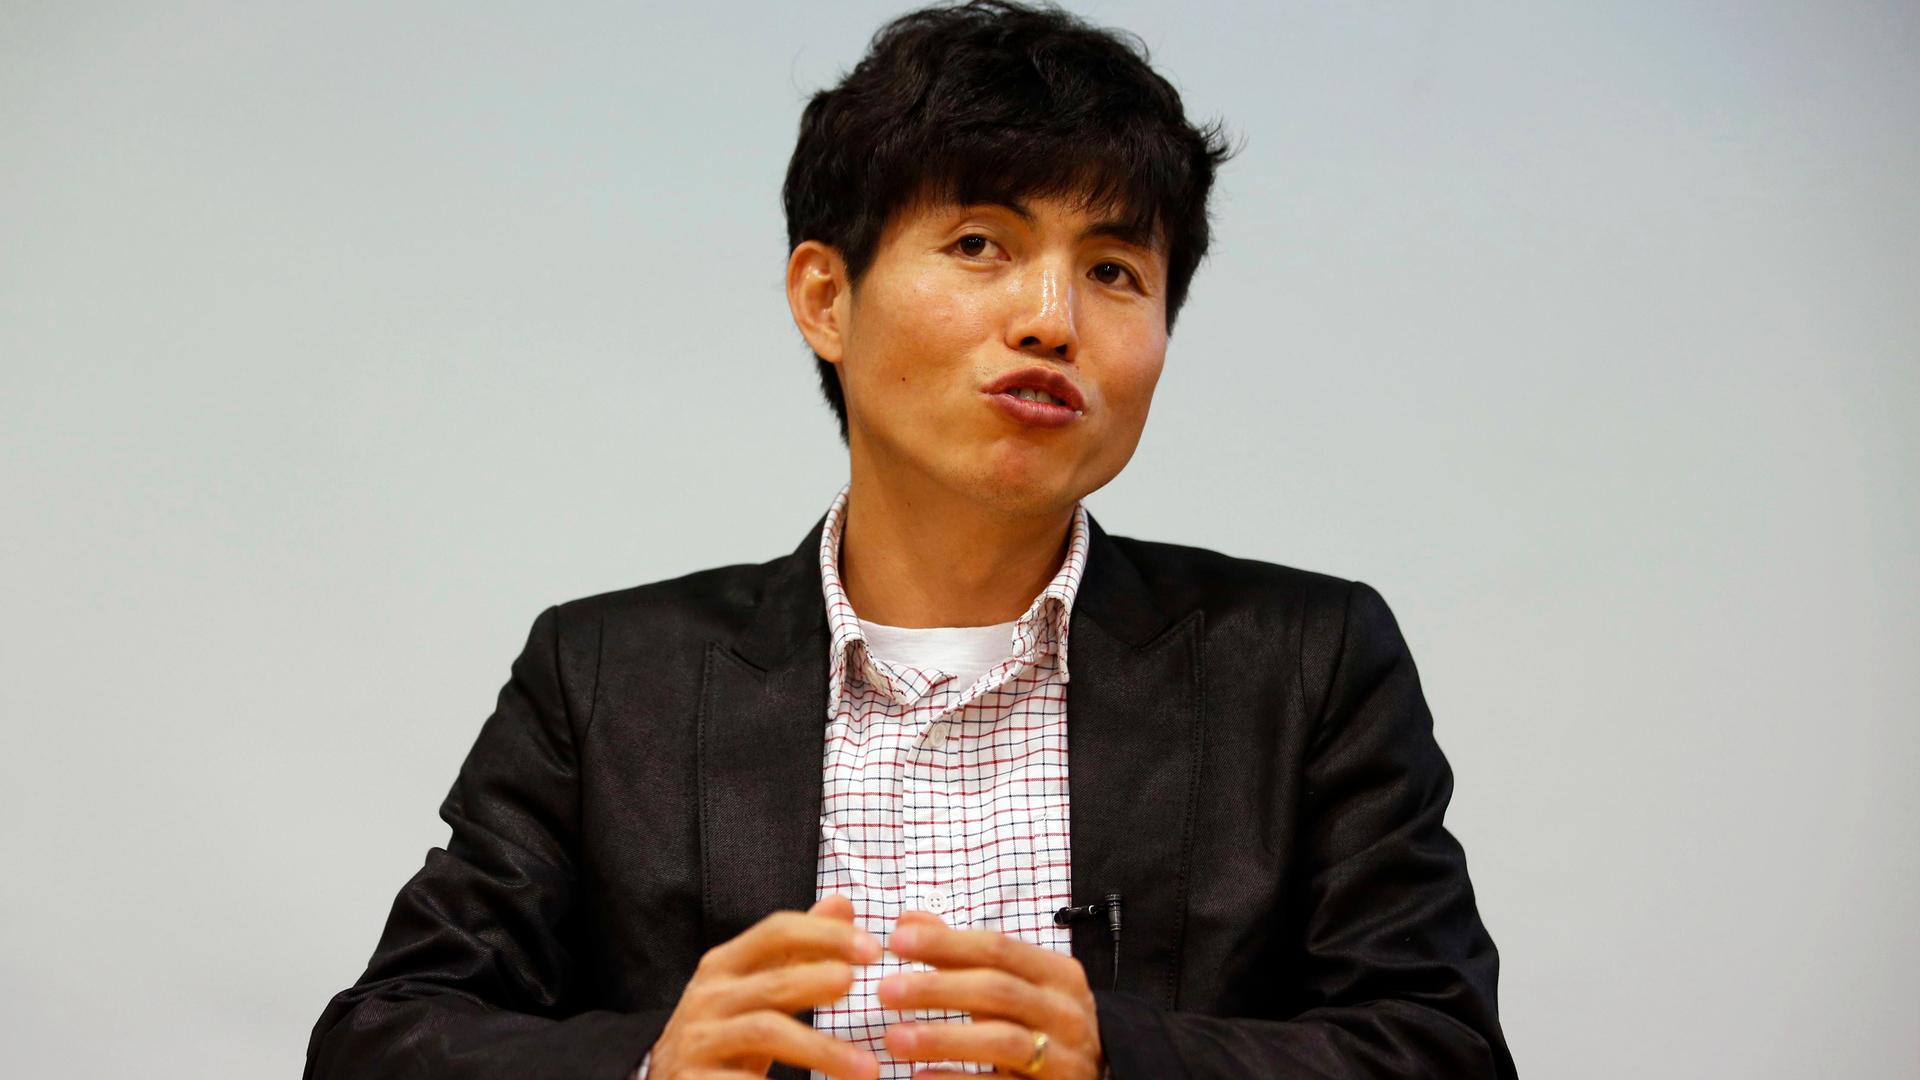 North Korean defector Shin Dong-hyuk accepted that changing parts of his story had tarnished the credibility of other defectors from the country.